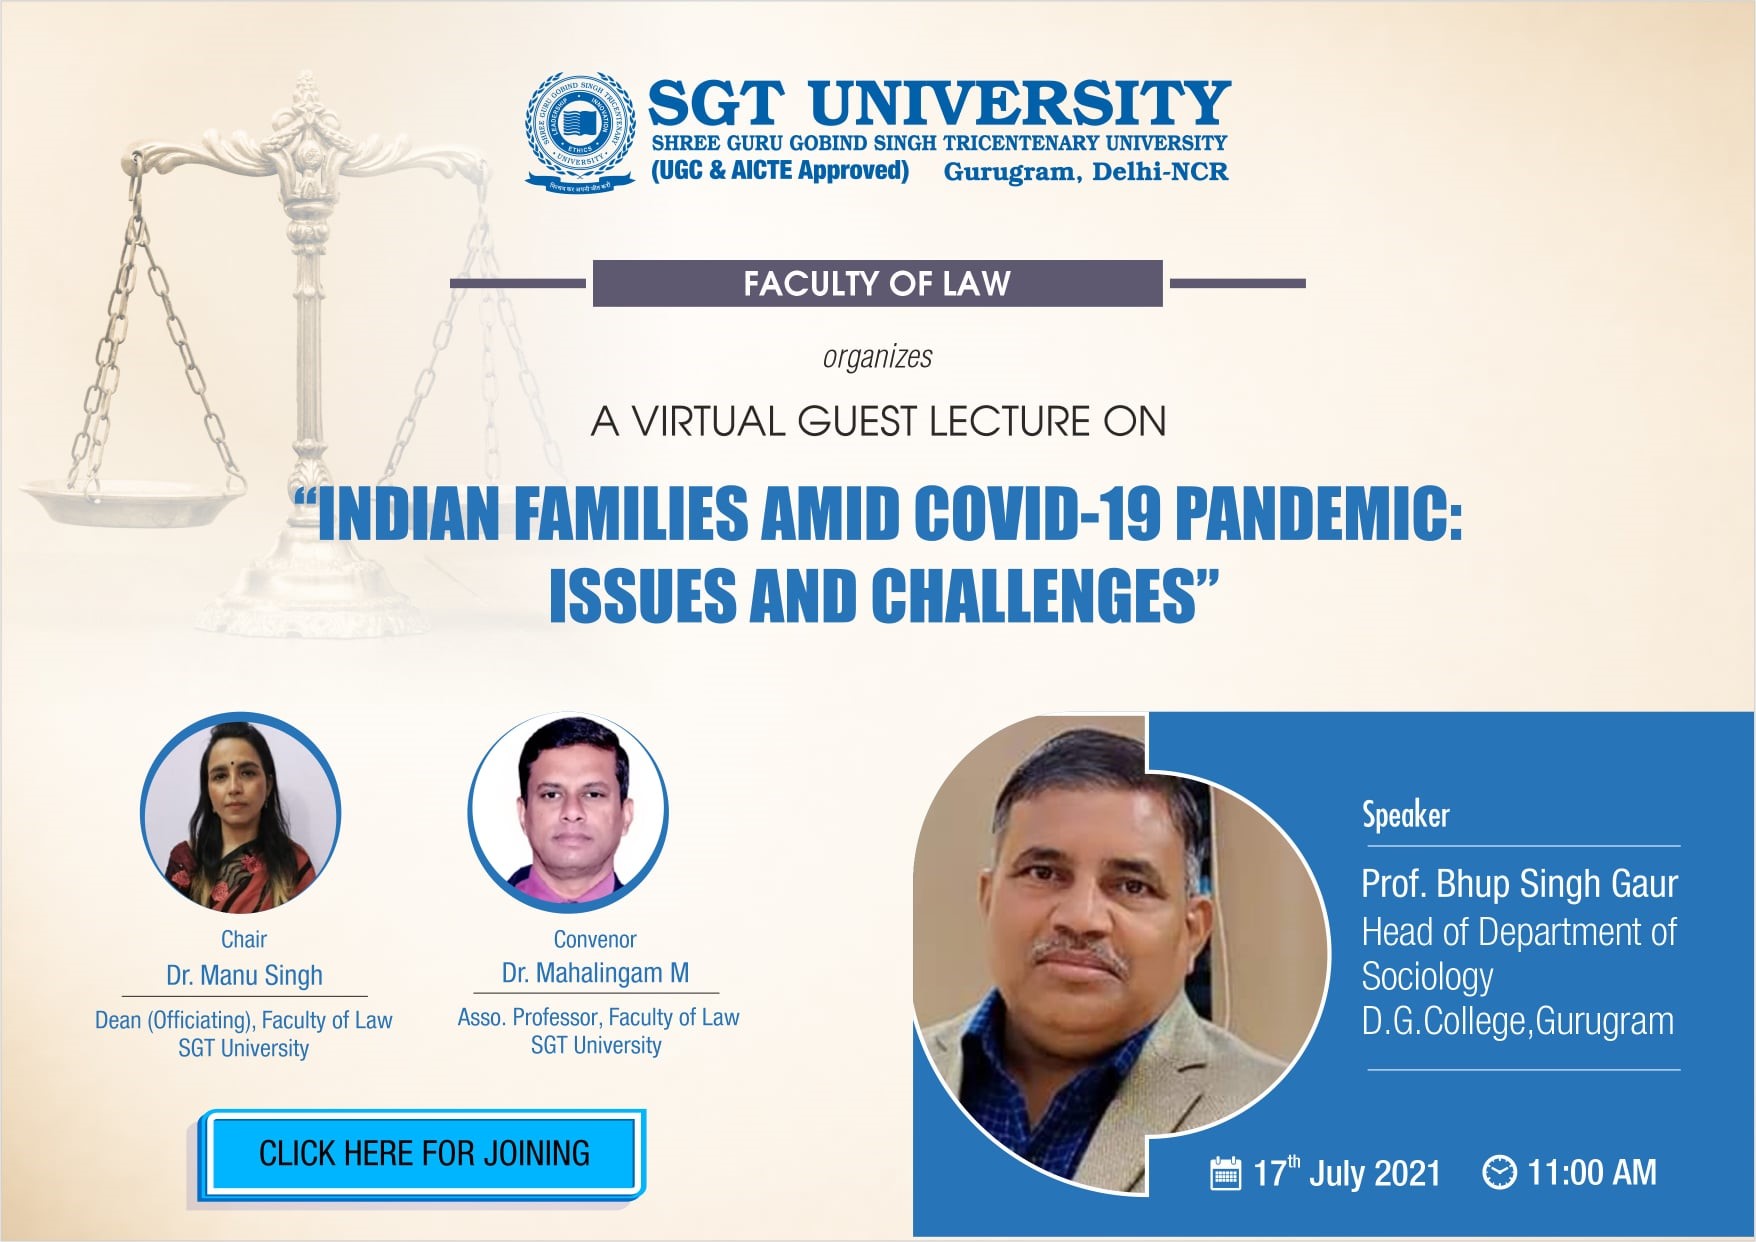 You are currently viewing VIRTUAL GUEST LECTURE ON “𝐈𝐧𝐝𝐢𝐚𝐧 𝐅𝐚𝐦𝐢𝐥𝐢𝐞𝐬 𝐀𝐦𝐢𝐝 𝐂𝐨𝐯𝐢𝐝-𝟏𝟗 𝐏𝐚𝐧𝐝𝐞𝐦𝐢𝐜: 𝐈𝐬𝐬𝐮𝐞𝐬 𝐚𝐧𝐝 𝐂𝐡𝐚𝐥𝐥𝐞𝐧𝐠𝐞𝐬”